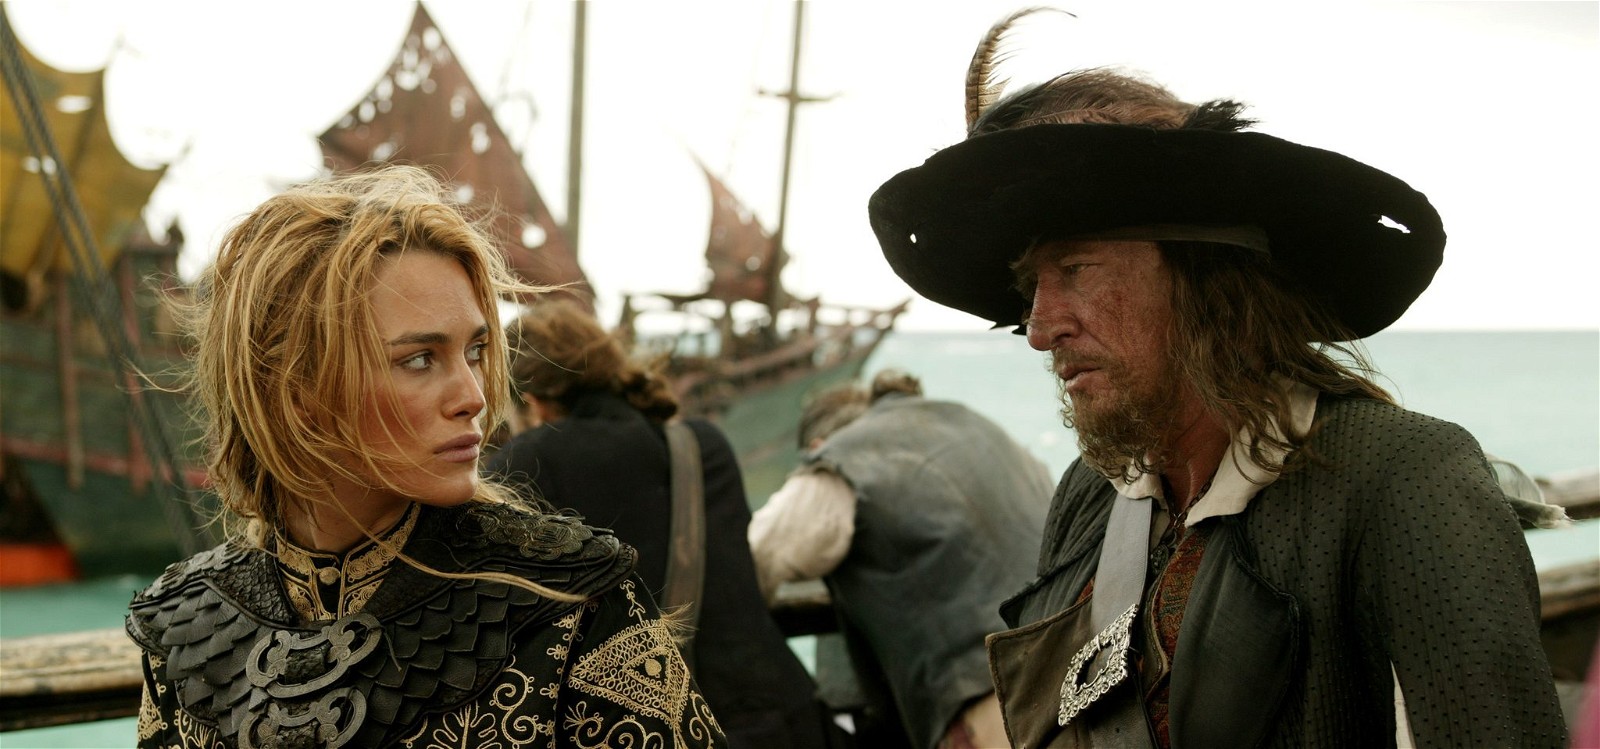 Keira Knightly as Elizabeth Swann and Geoffery Rush as Hector Barbossa in Pirates of the Caribbean: At World's End | Disney Pictures